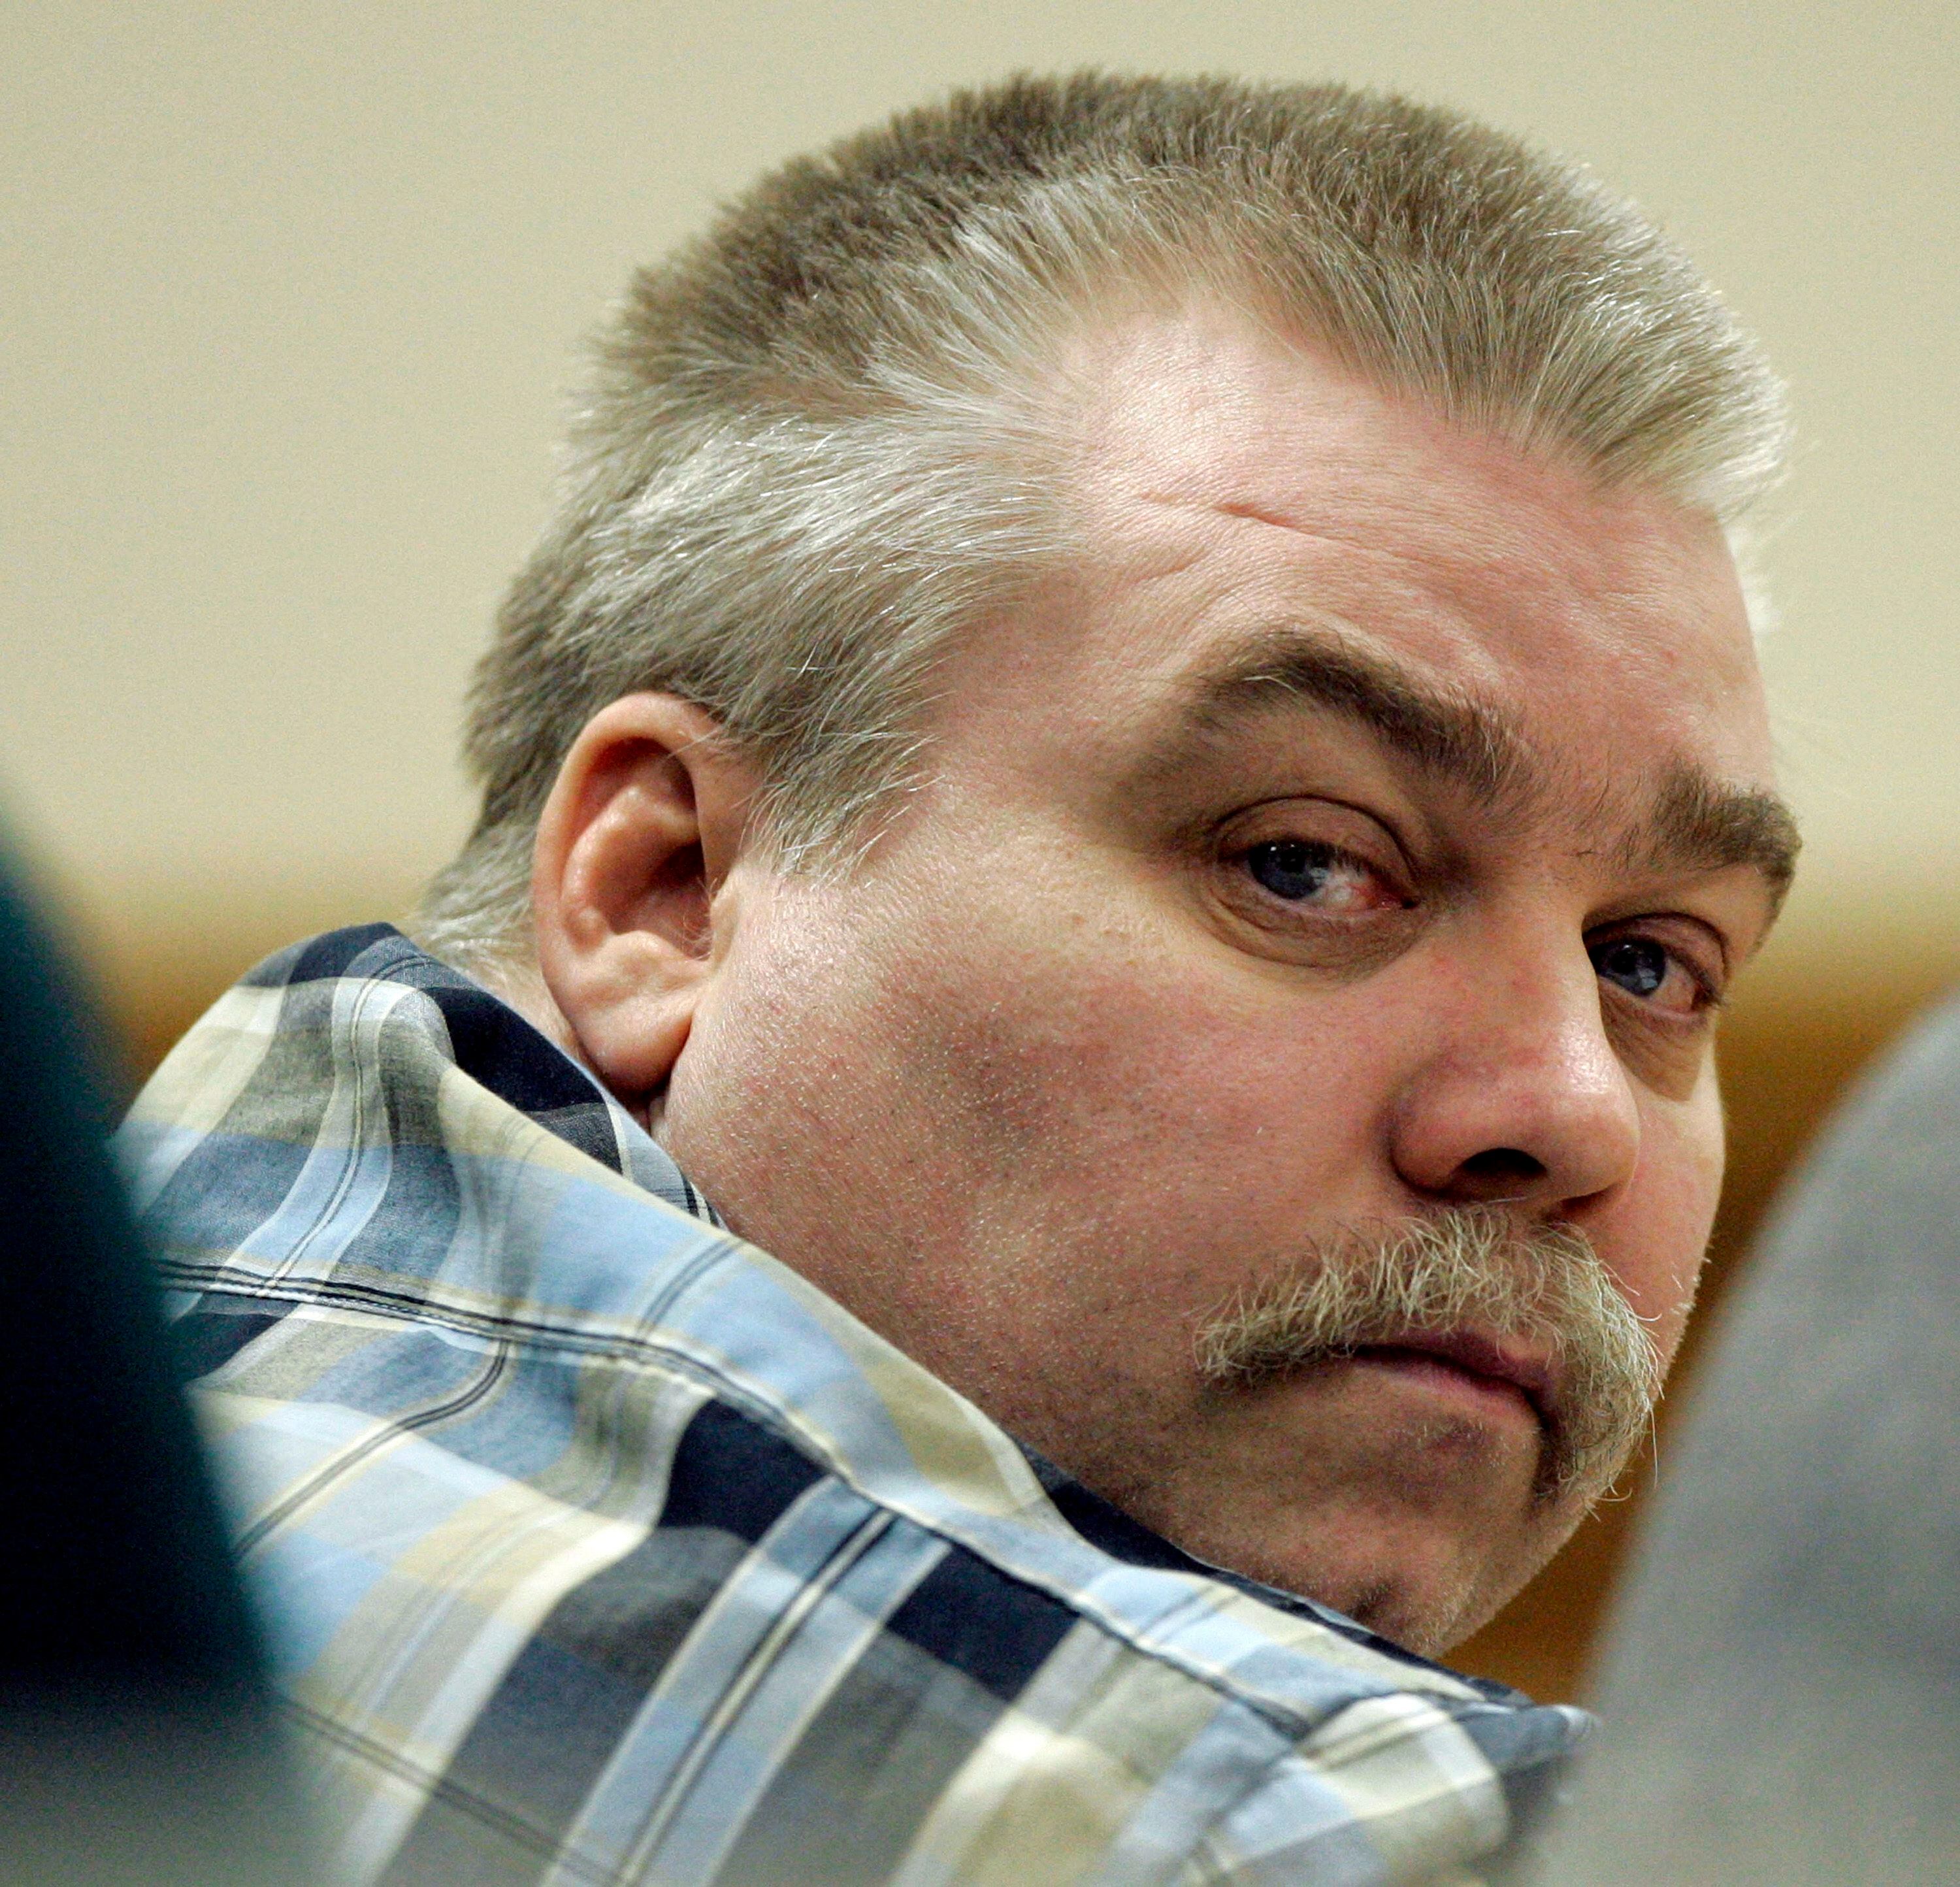 Court nixes new trial for ‘Making a Murderer’ subject Avery